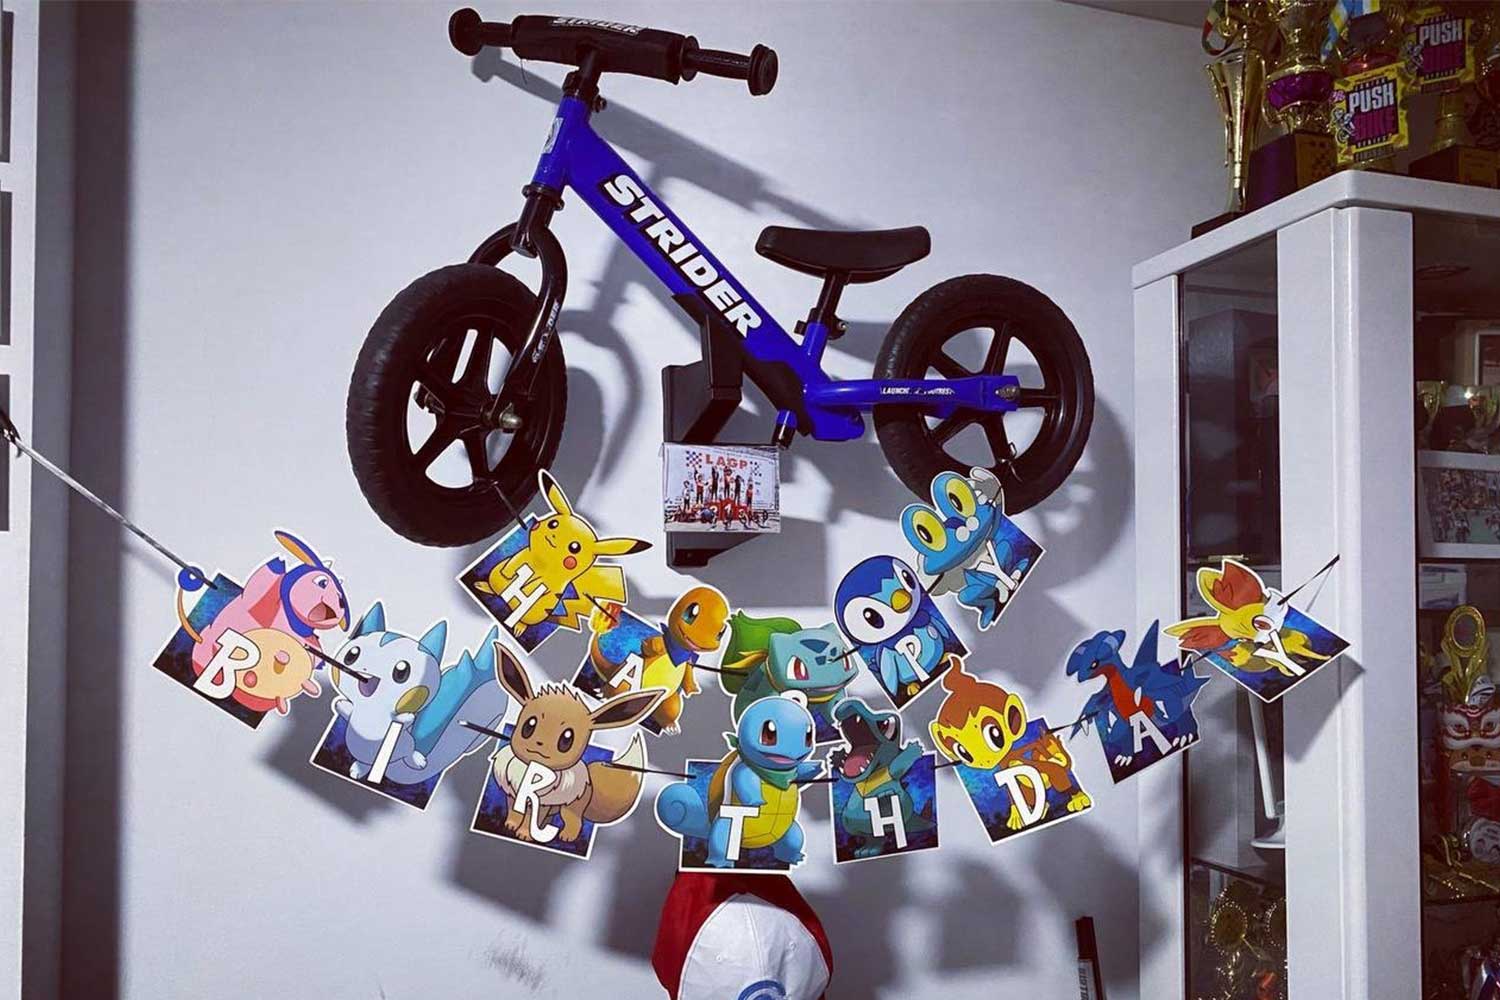 Strider Bike in a Memory Mount with a happy birthday banner below